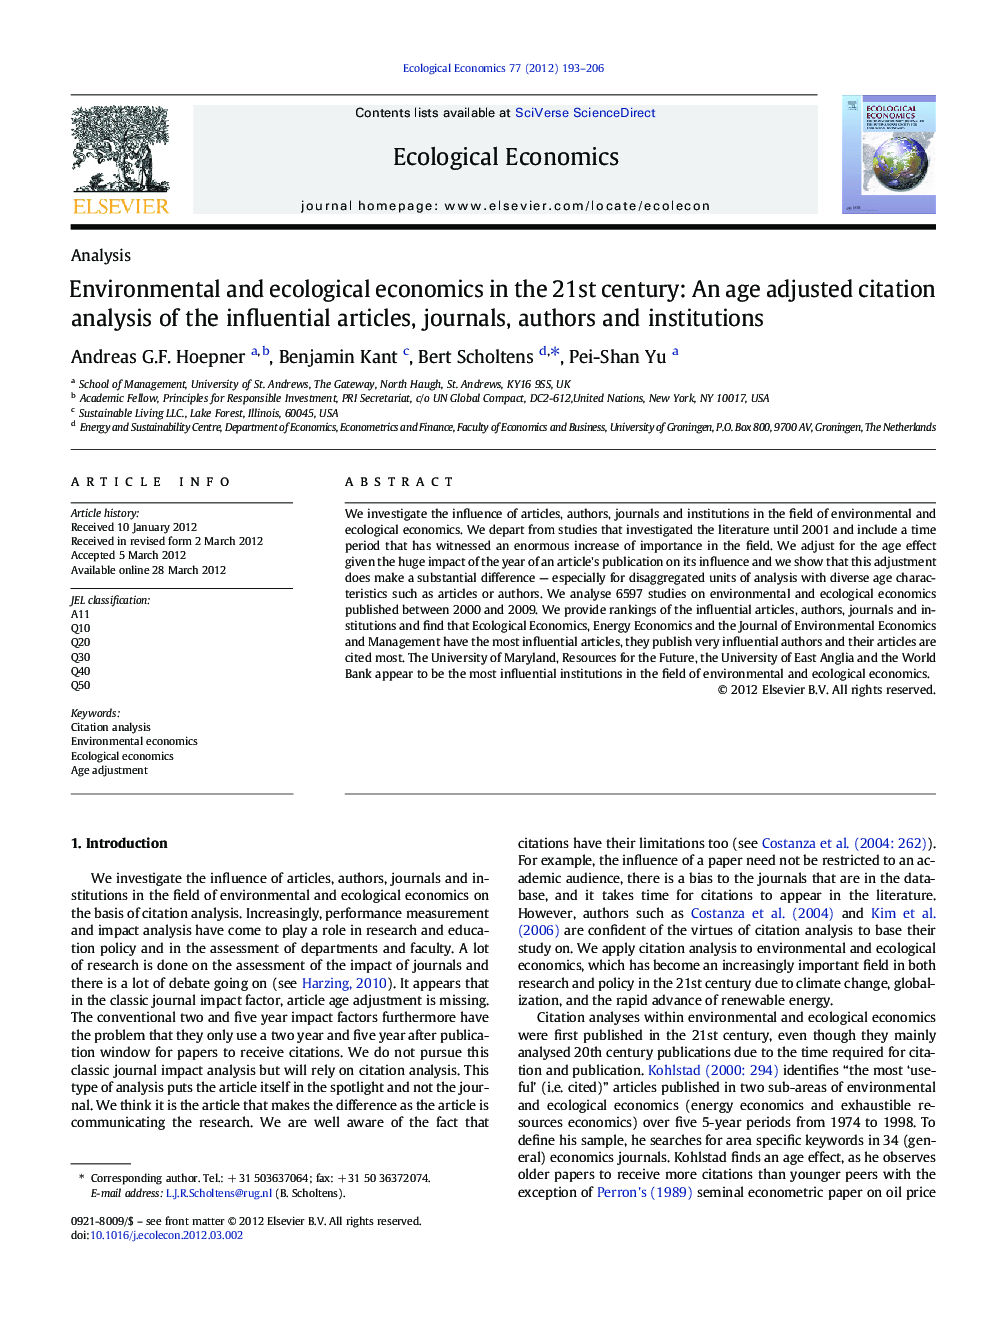 Environmental and ecological economics in the 21st century: An age adjusted citation analysis of the influential articles, journals, authors and institutions